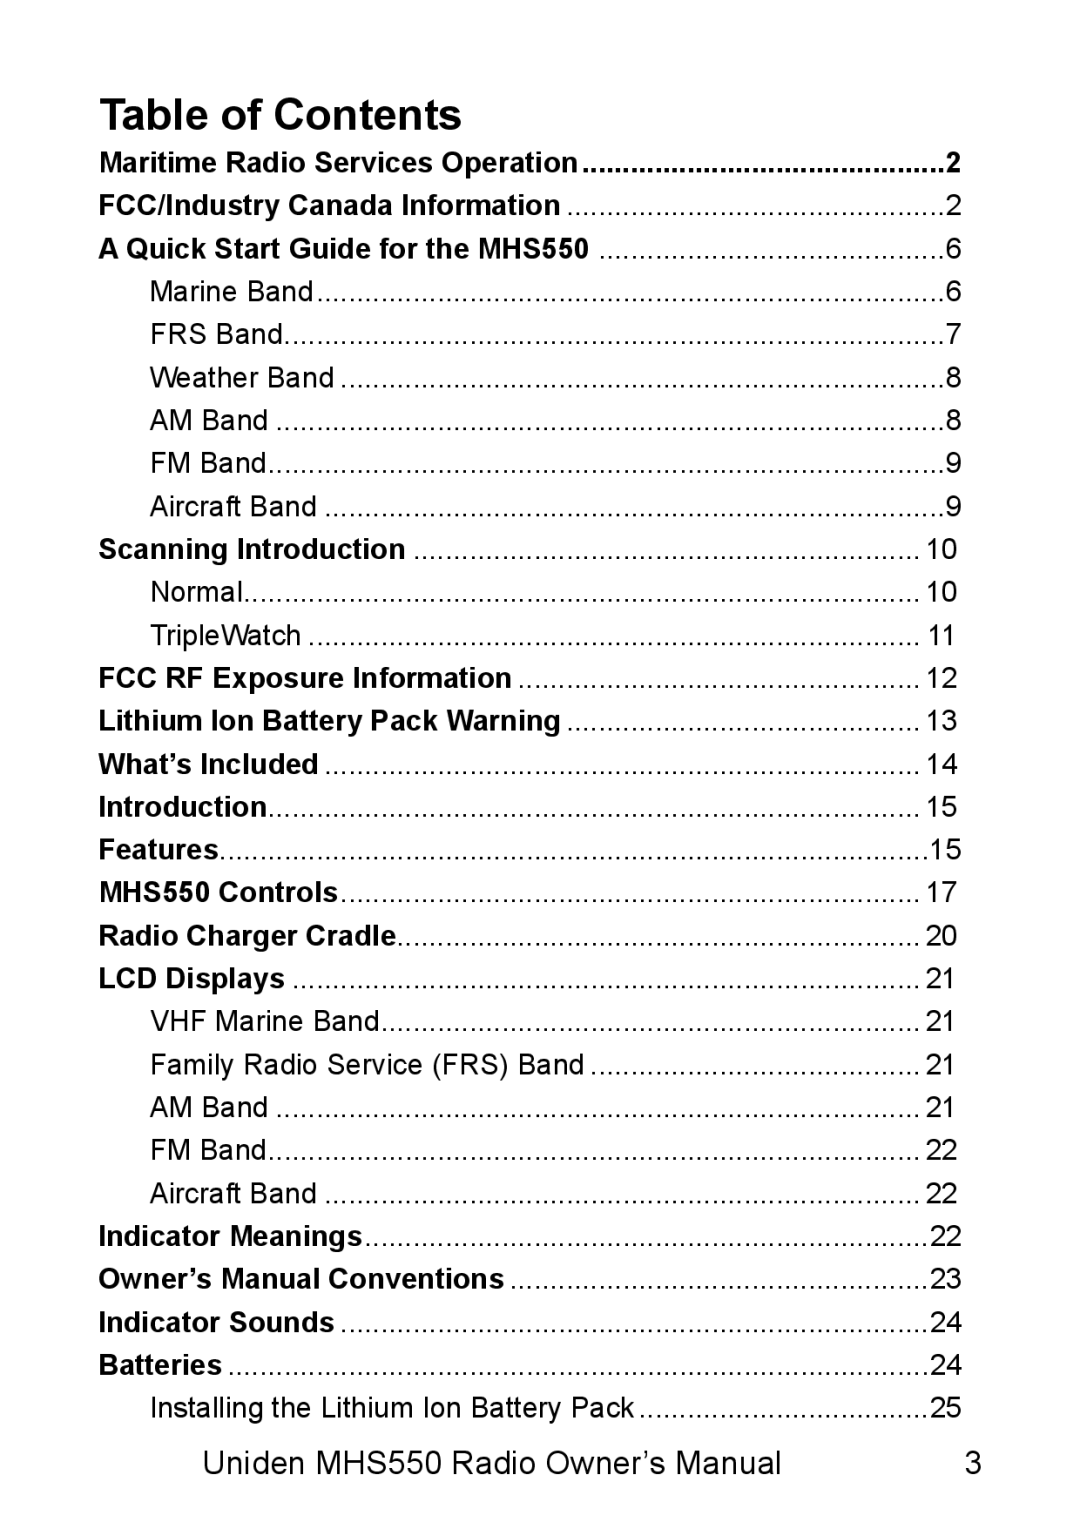 Uniden MHS550 manual Table of Contents 